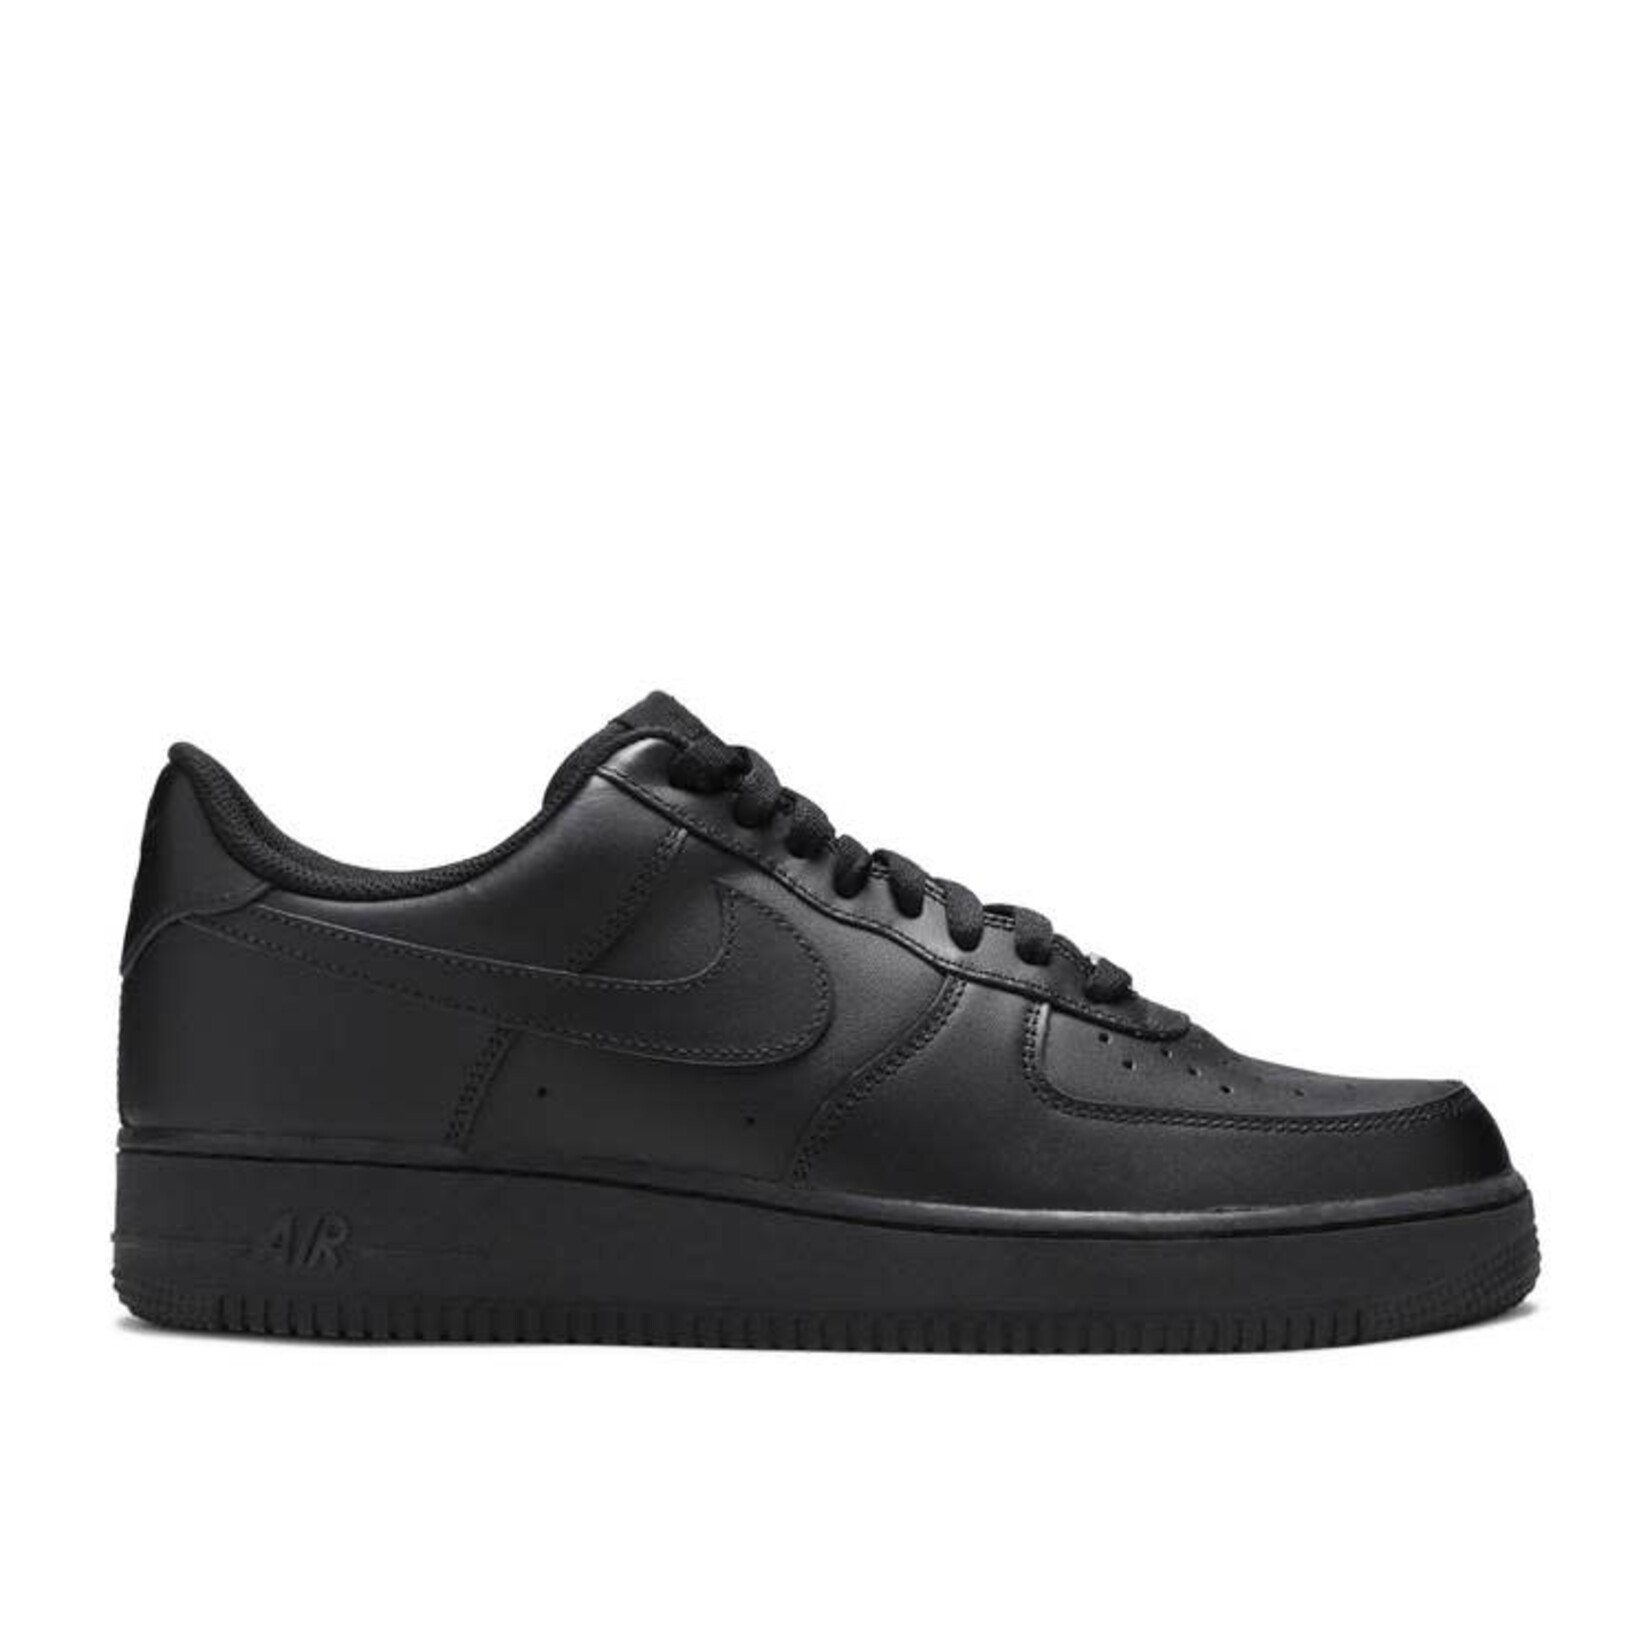 Nike Nike Air Force 1 Low '07 Black Size 14, DS BRAND NEW